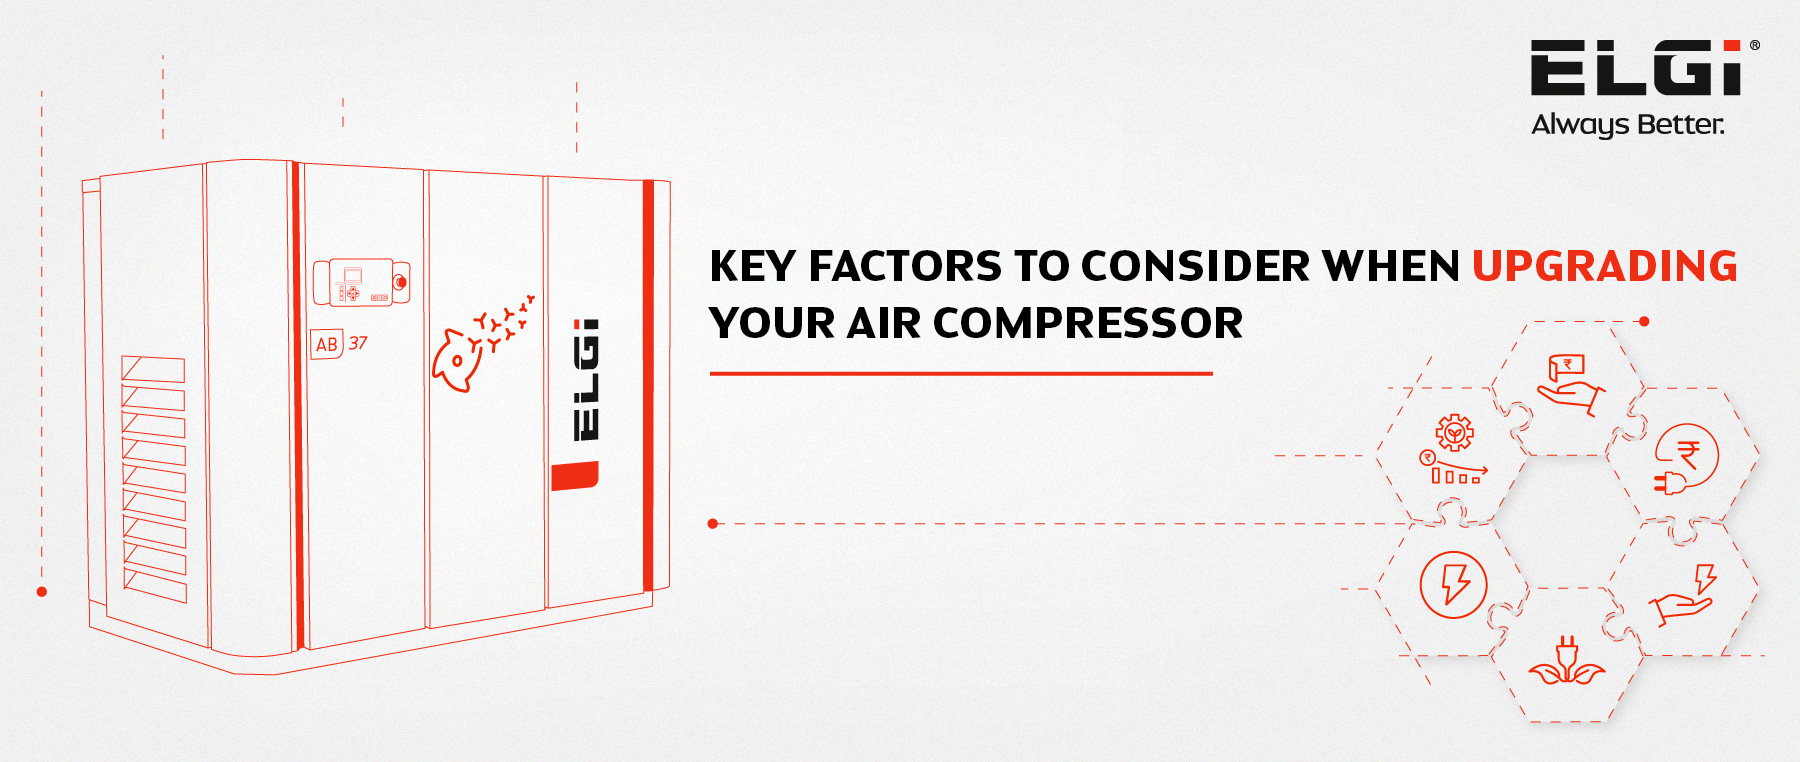 Key Factors to Consider When Upgrading Your Air Compressor